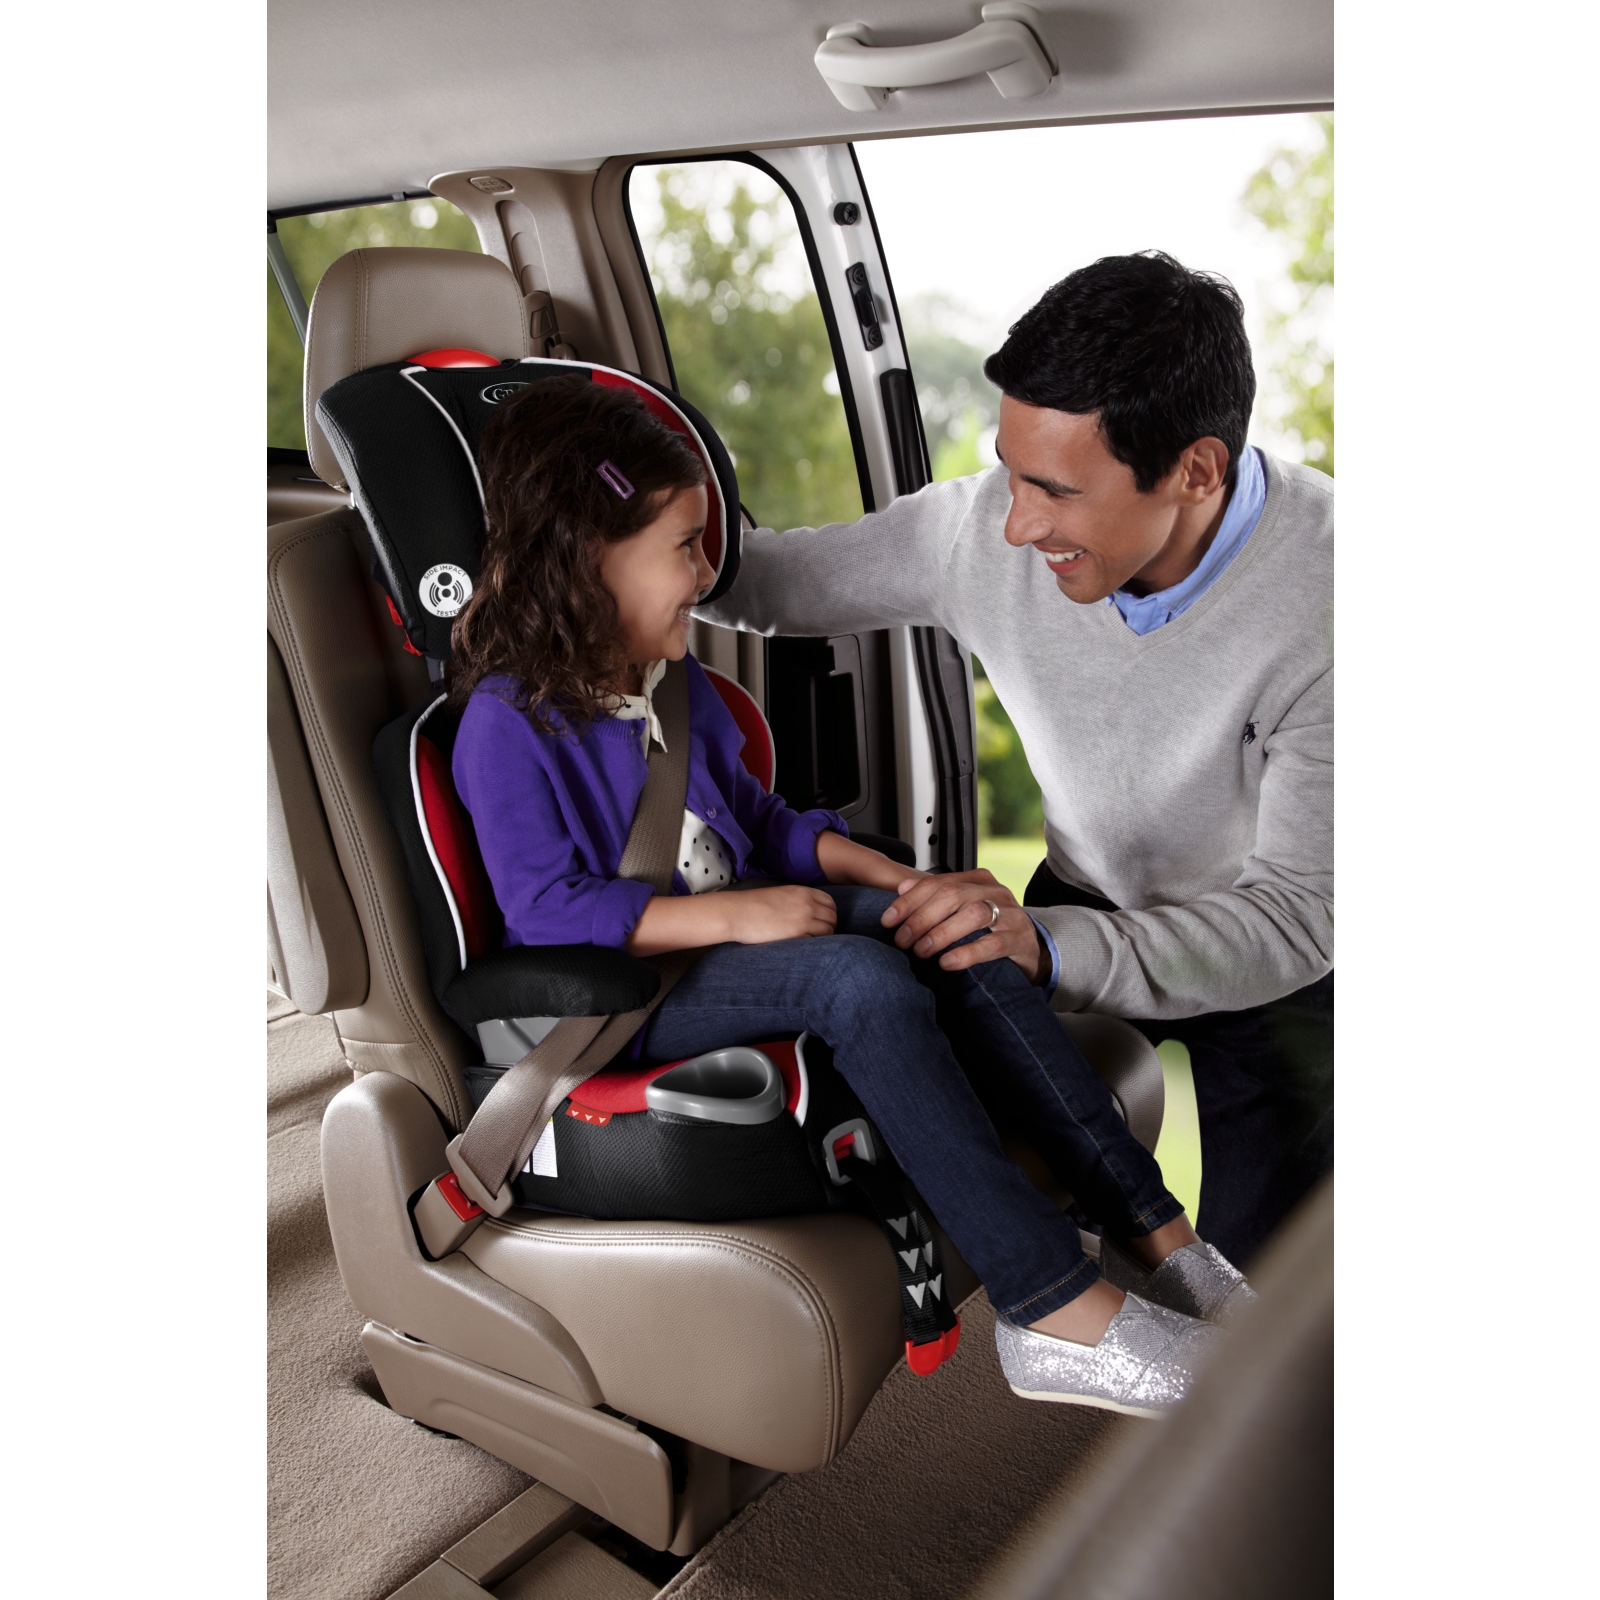 graco affix highback booster seat